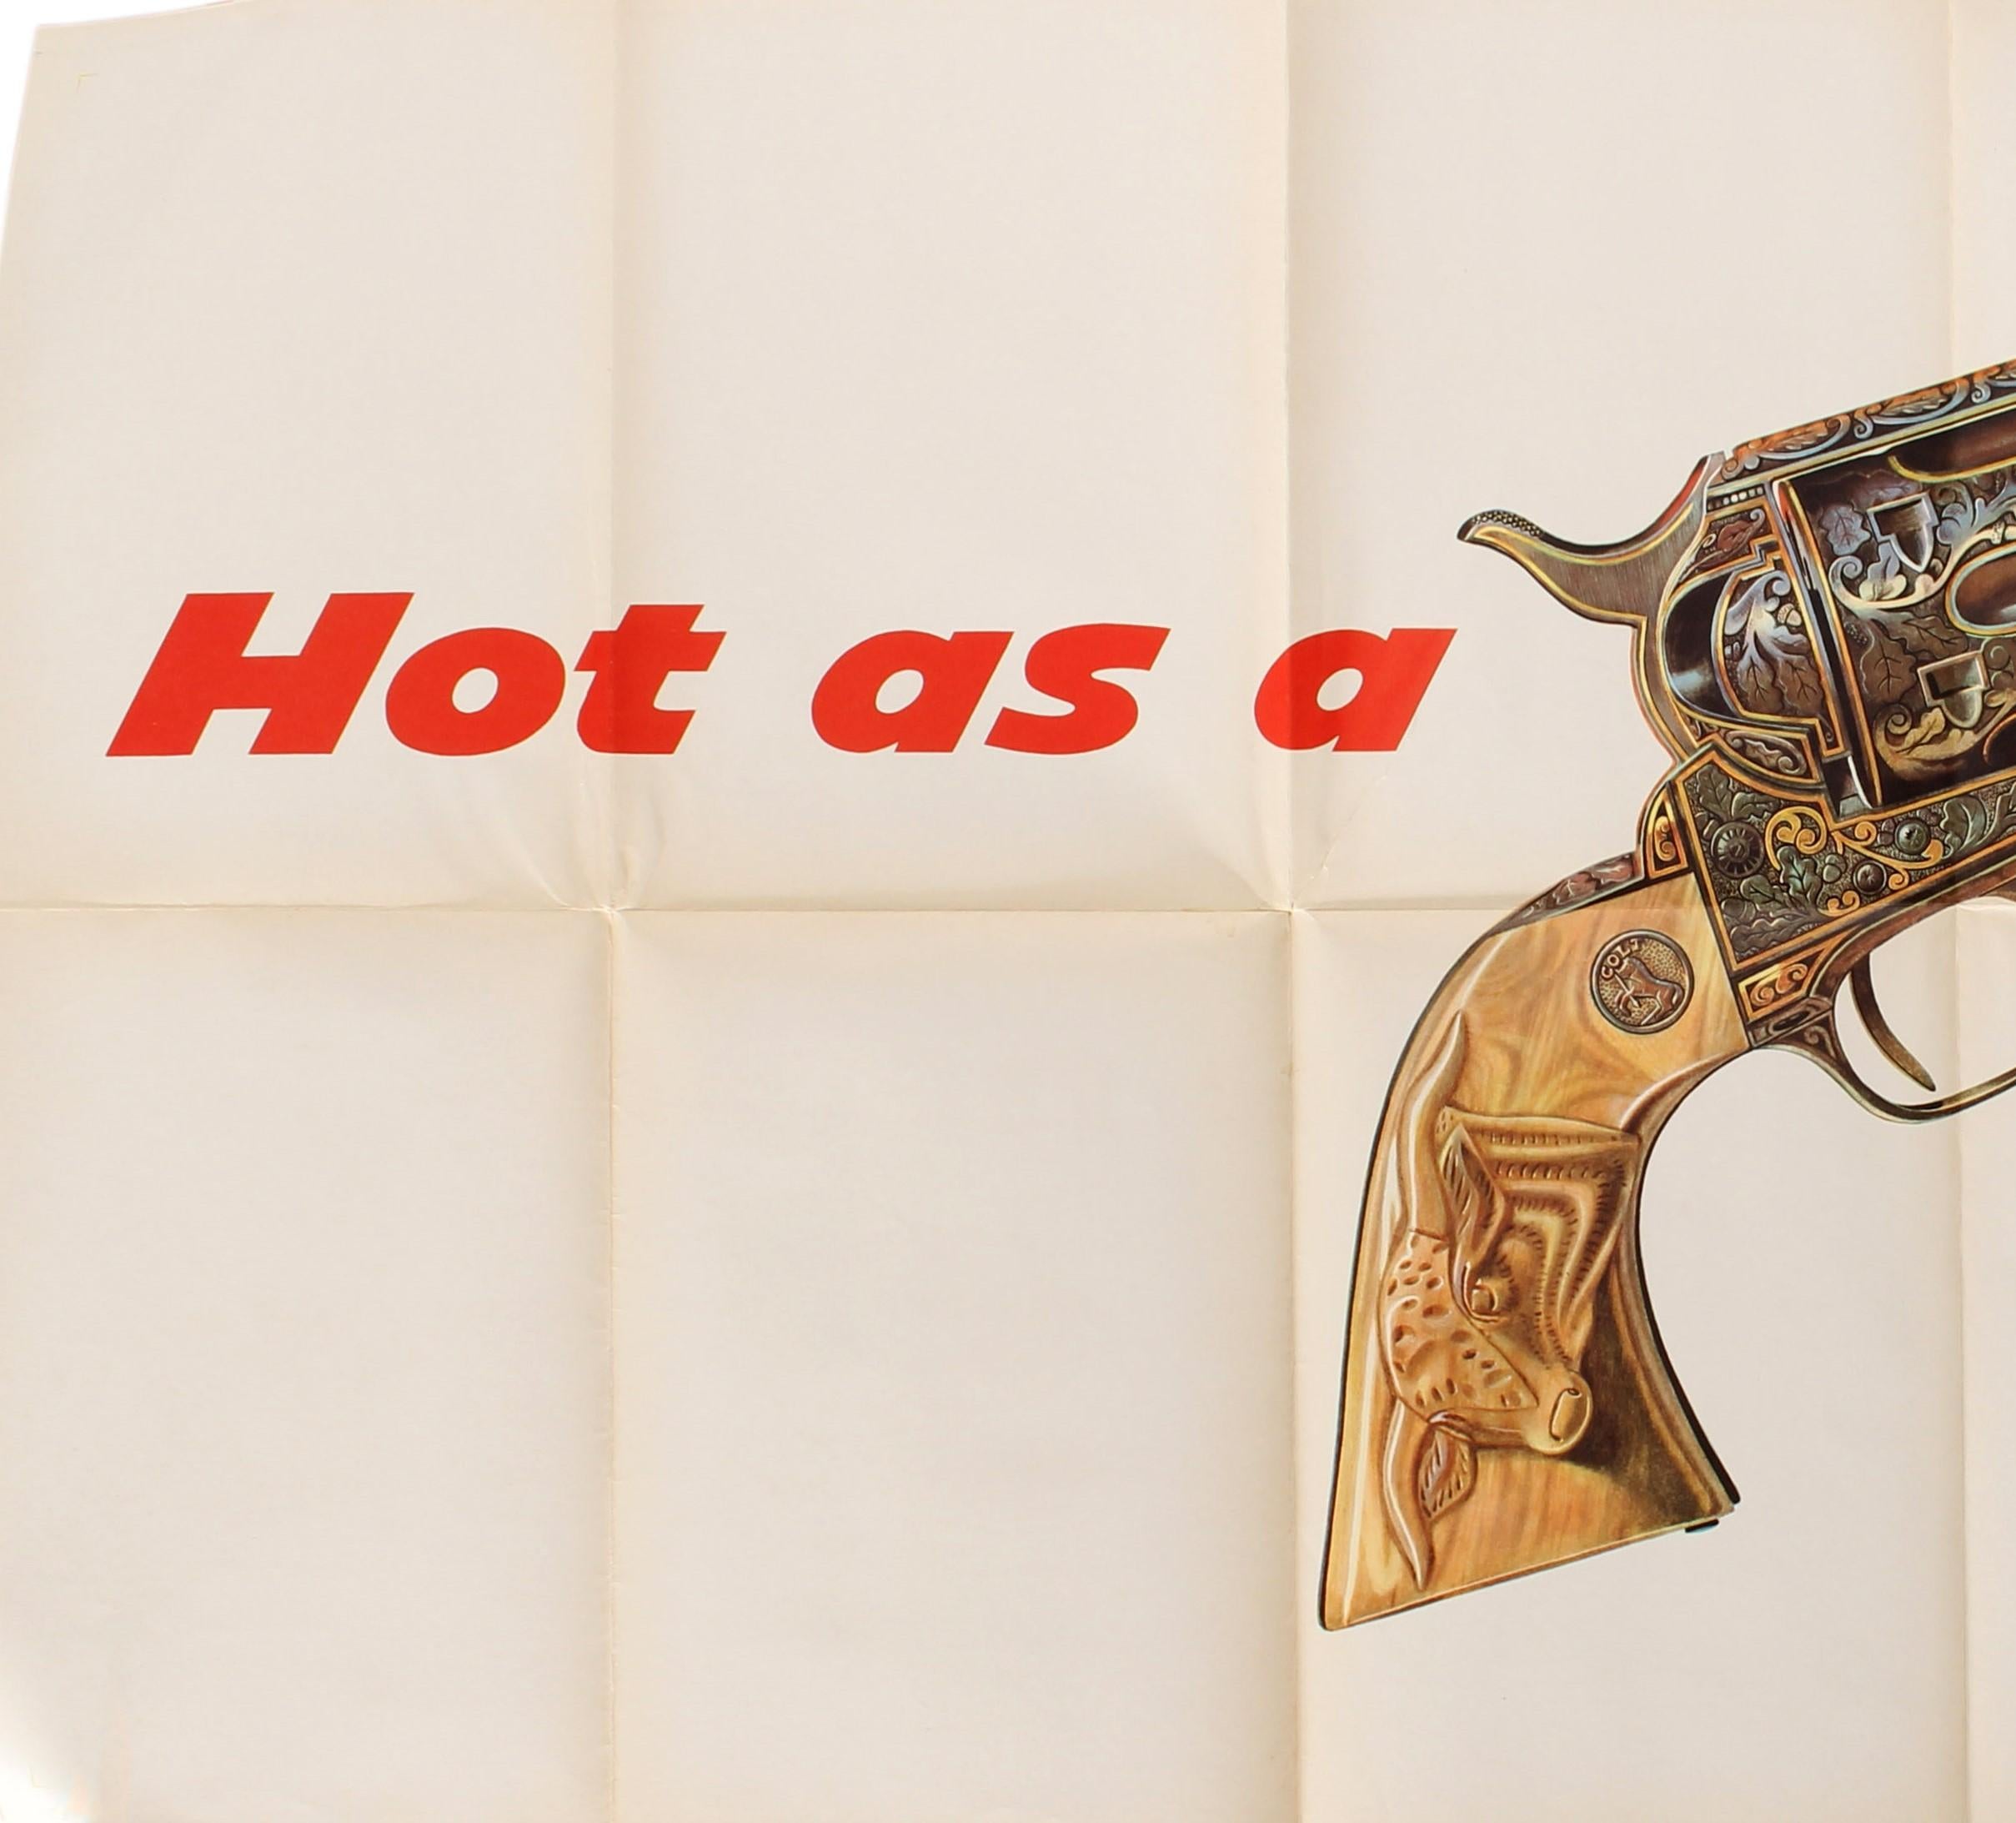 Original vintage car advertising poster for The New De Soto Hot as a smoking gun featuring a great design showing an image of a smoking Colt Texan Jr. revolver pistol gun decorated with detailed patterns including leaves and a buffalo on the handle